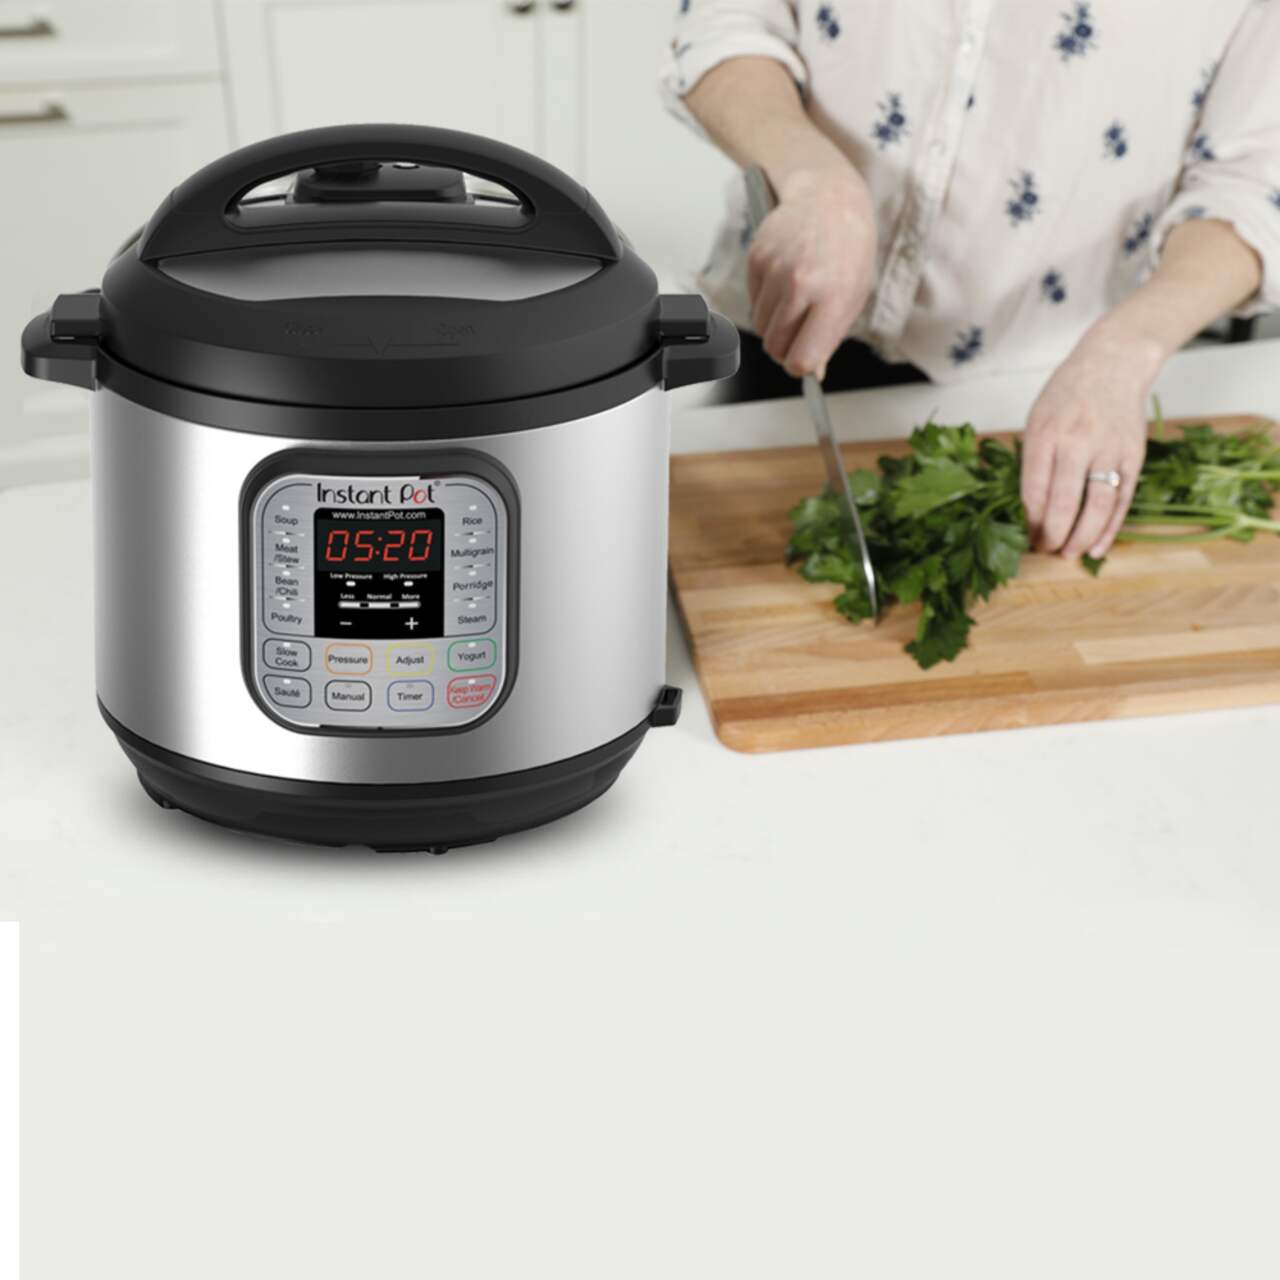 https://media-www.canadiantire.ca/product/living/kitchen/kitchen-appliances/0432672/instant-pot-duo-6-quart-pressure-cooker-3a2db6e1-4f6f-4ba2-b416-c37805fad8d9.png?imdensity=1&imwidth=1244&impolicy=mZoom